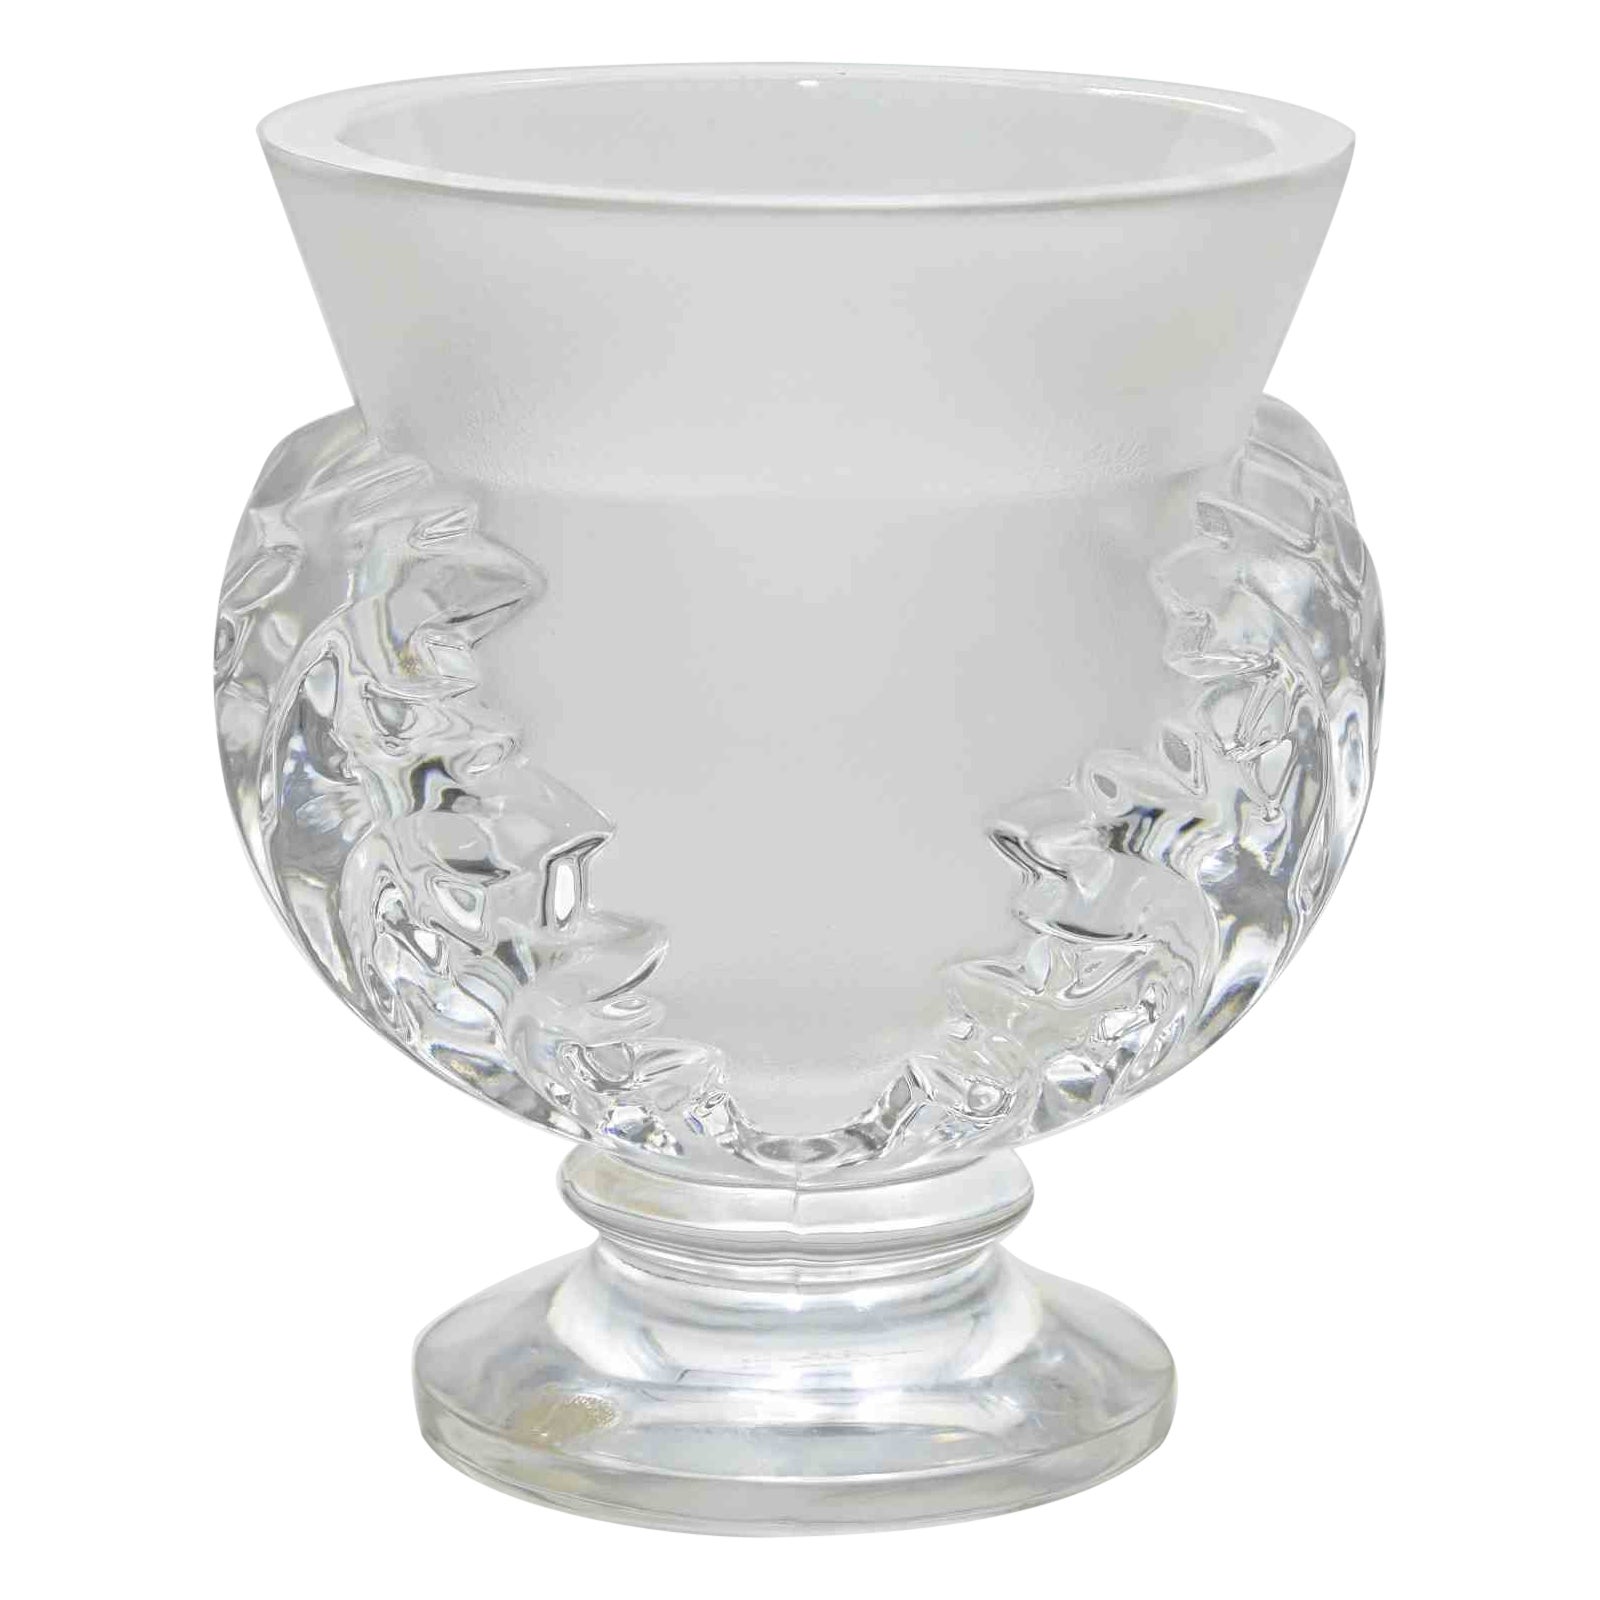 Vintage Glass Vase by Lalique, France, Mid-20th Century